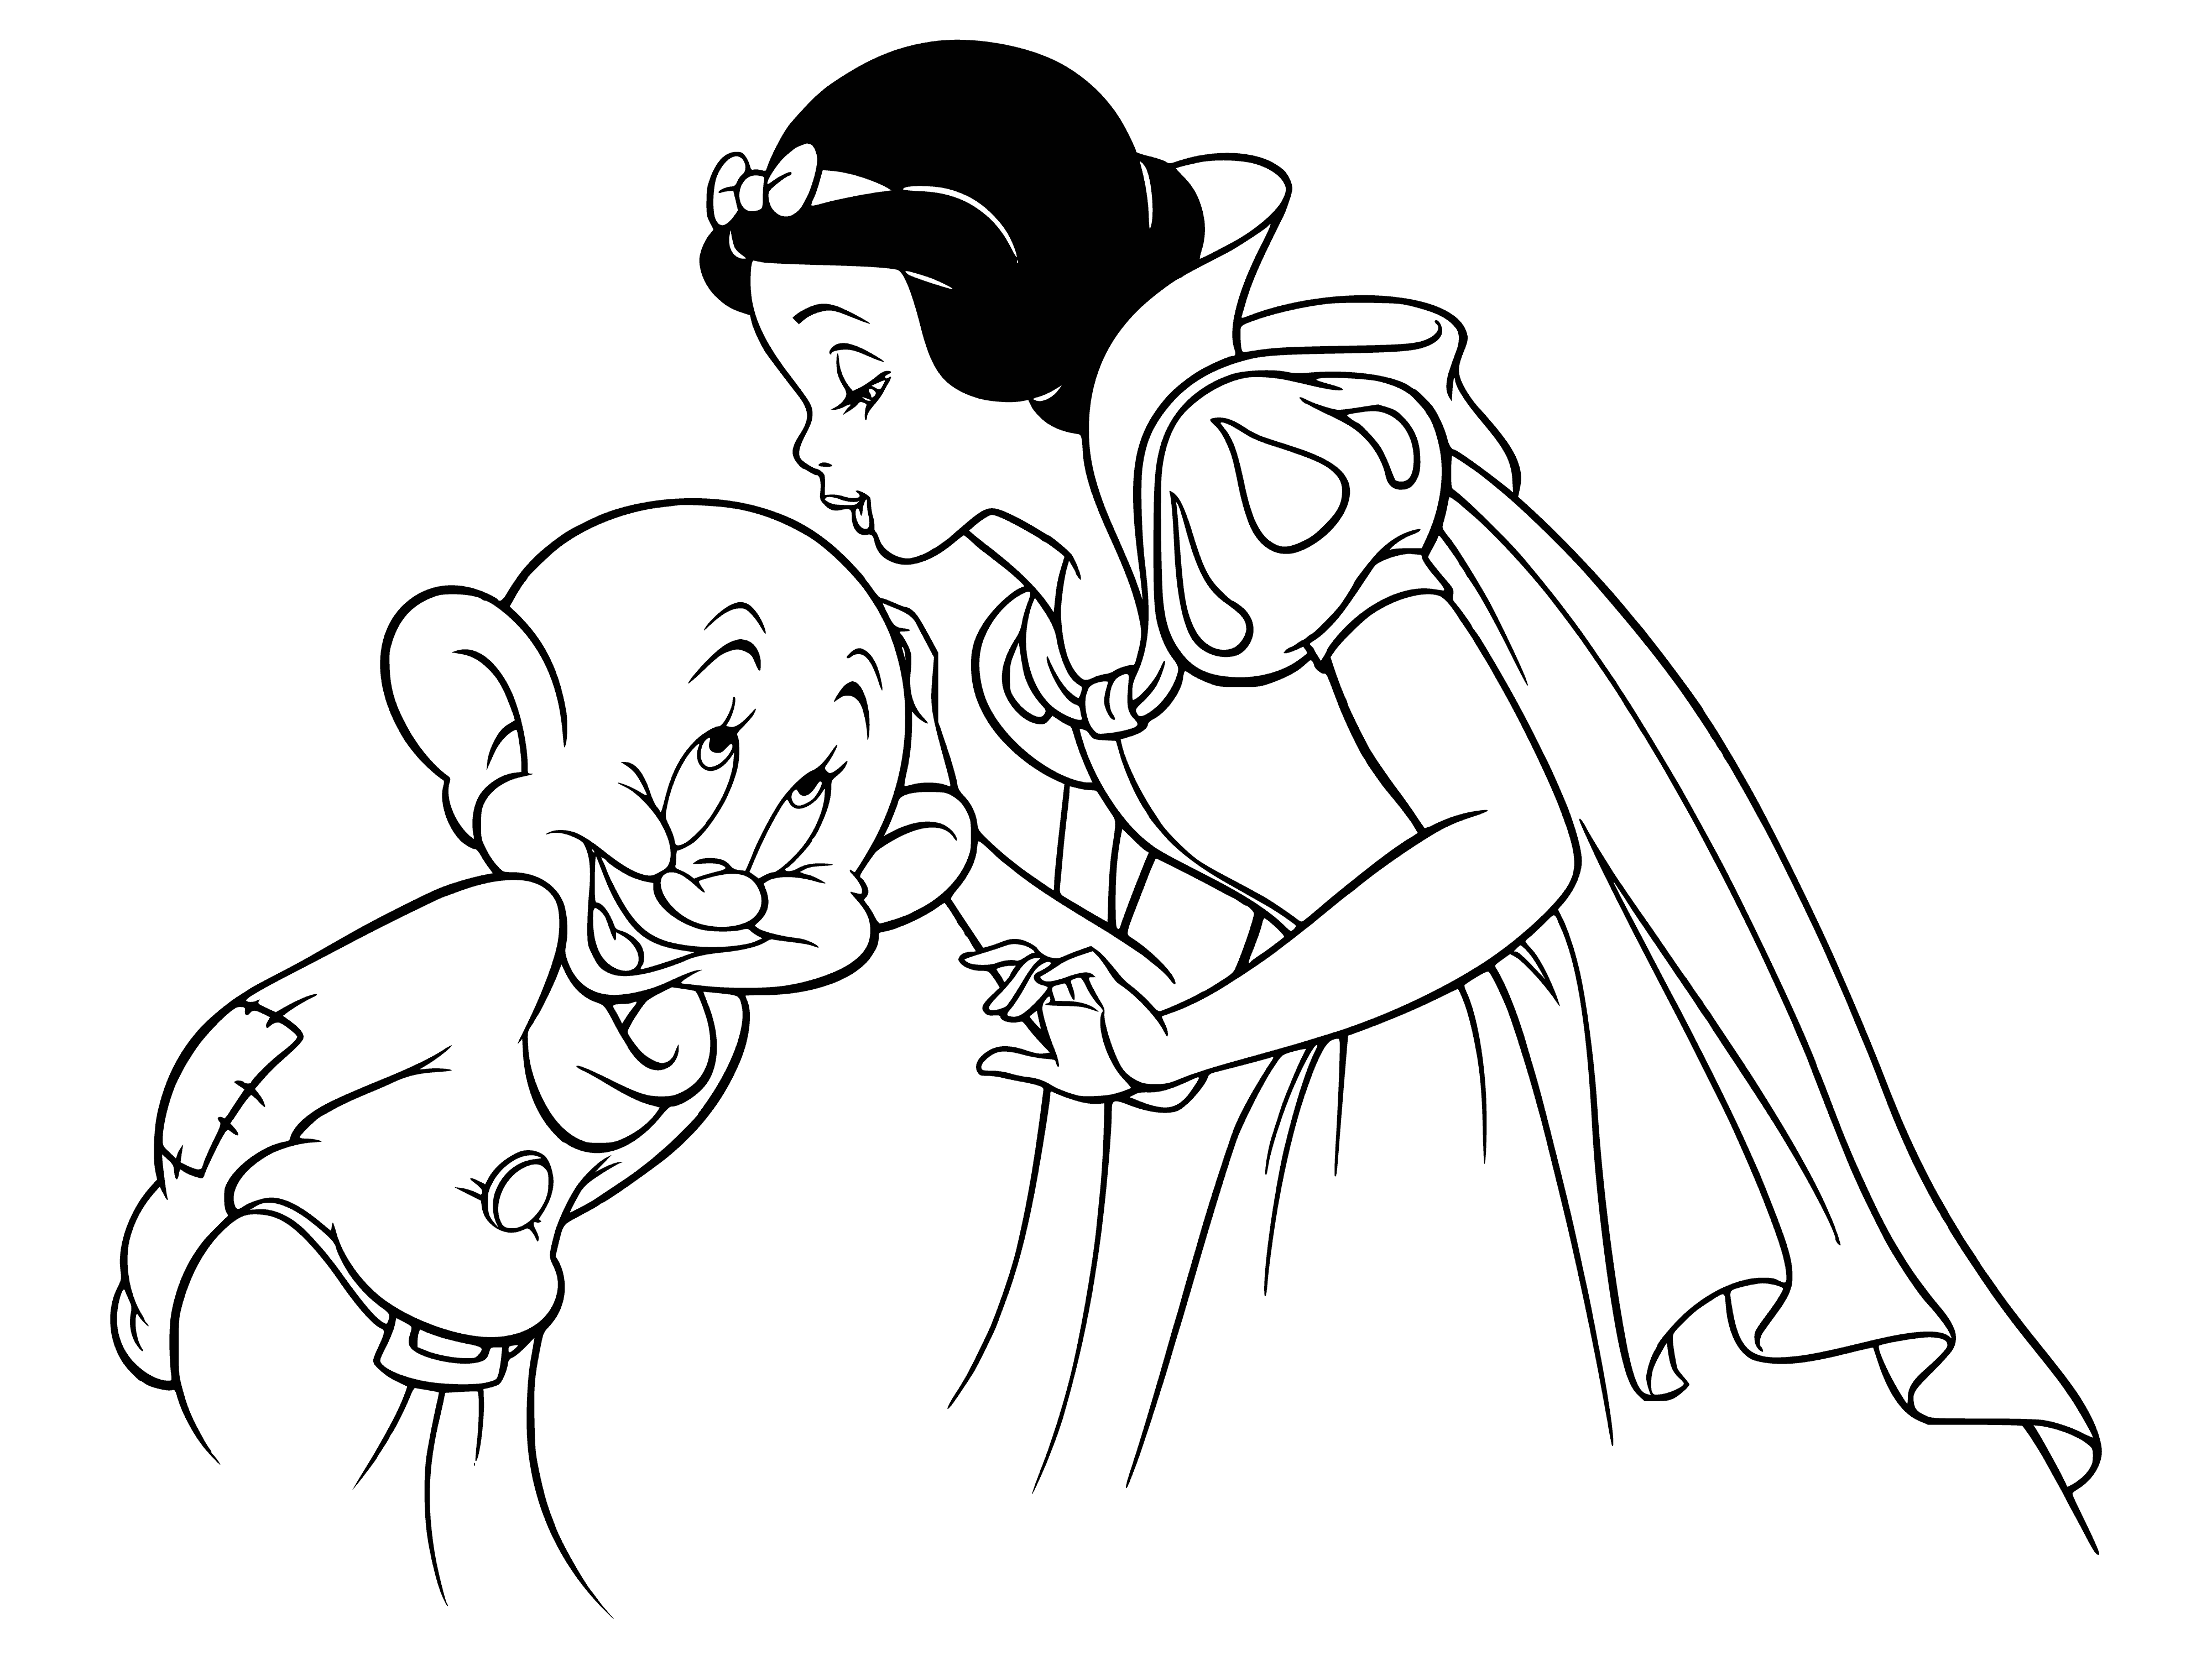 Snow White and the Simpleton coloring page